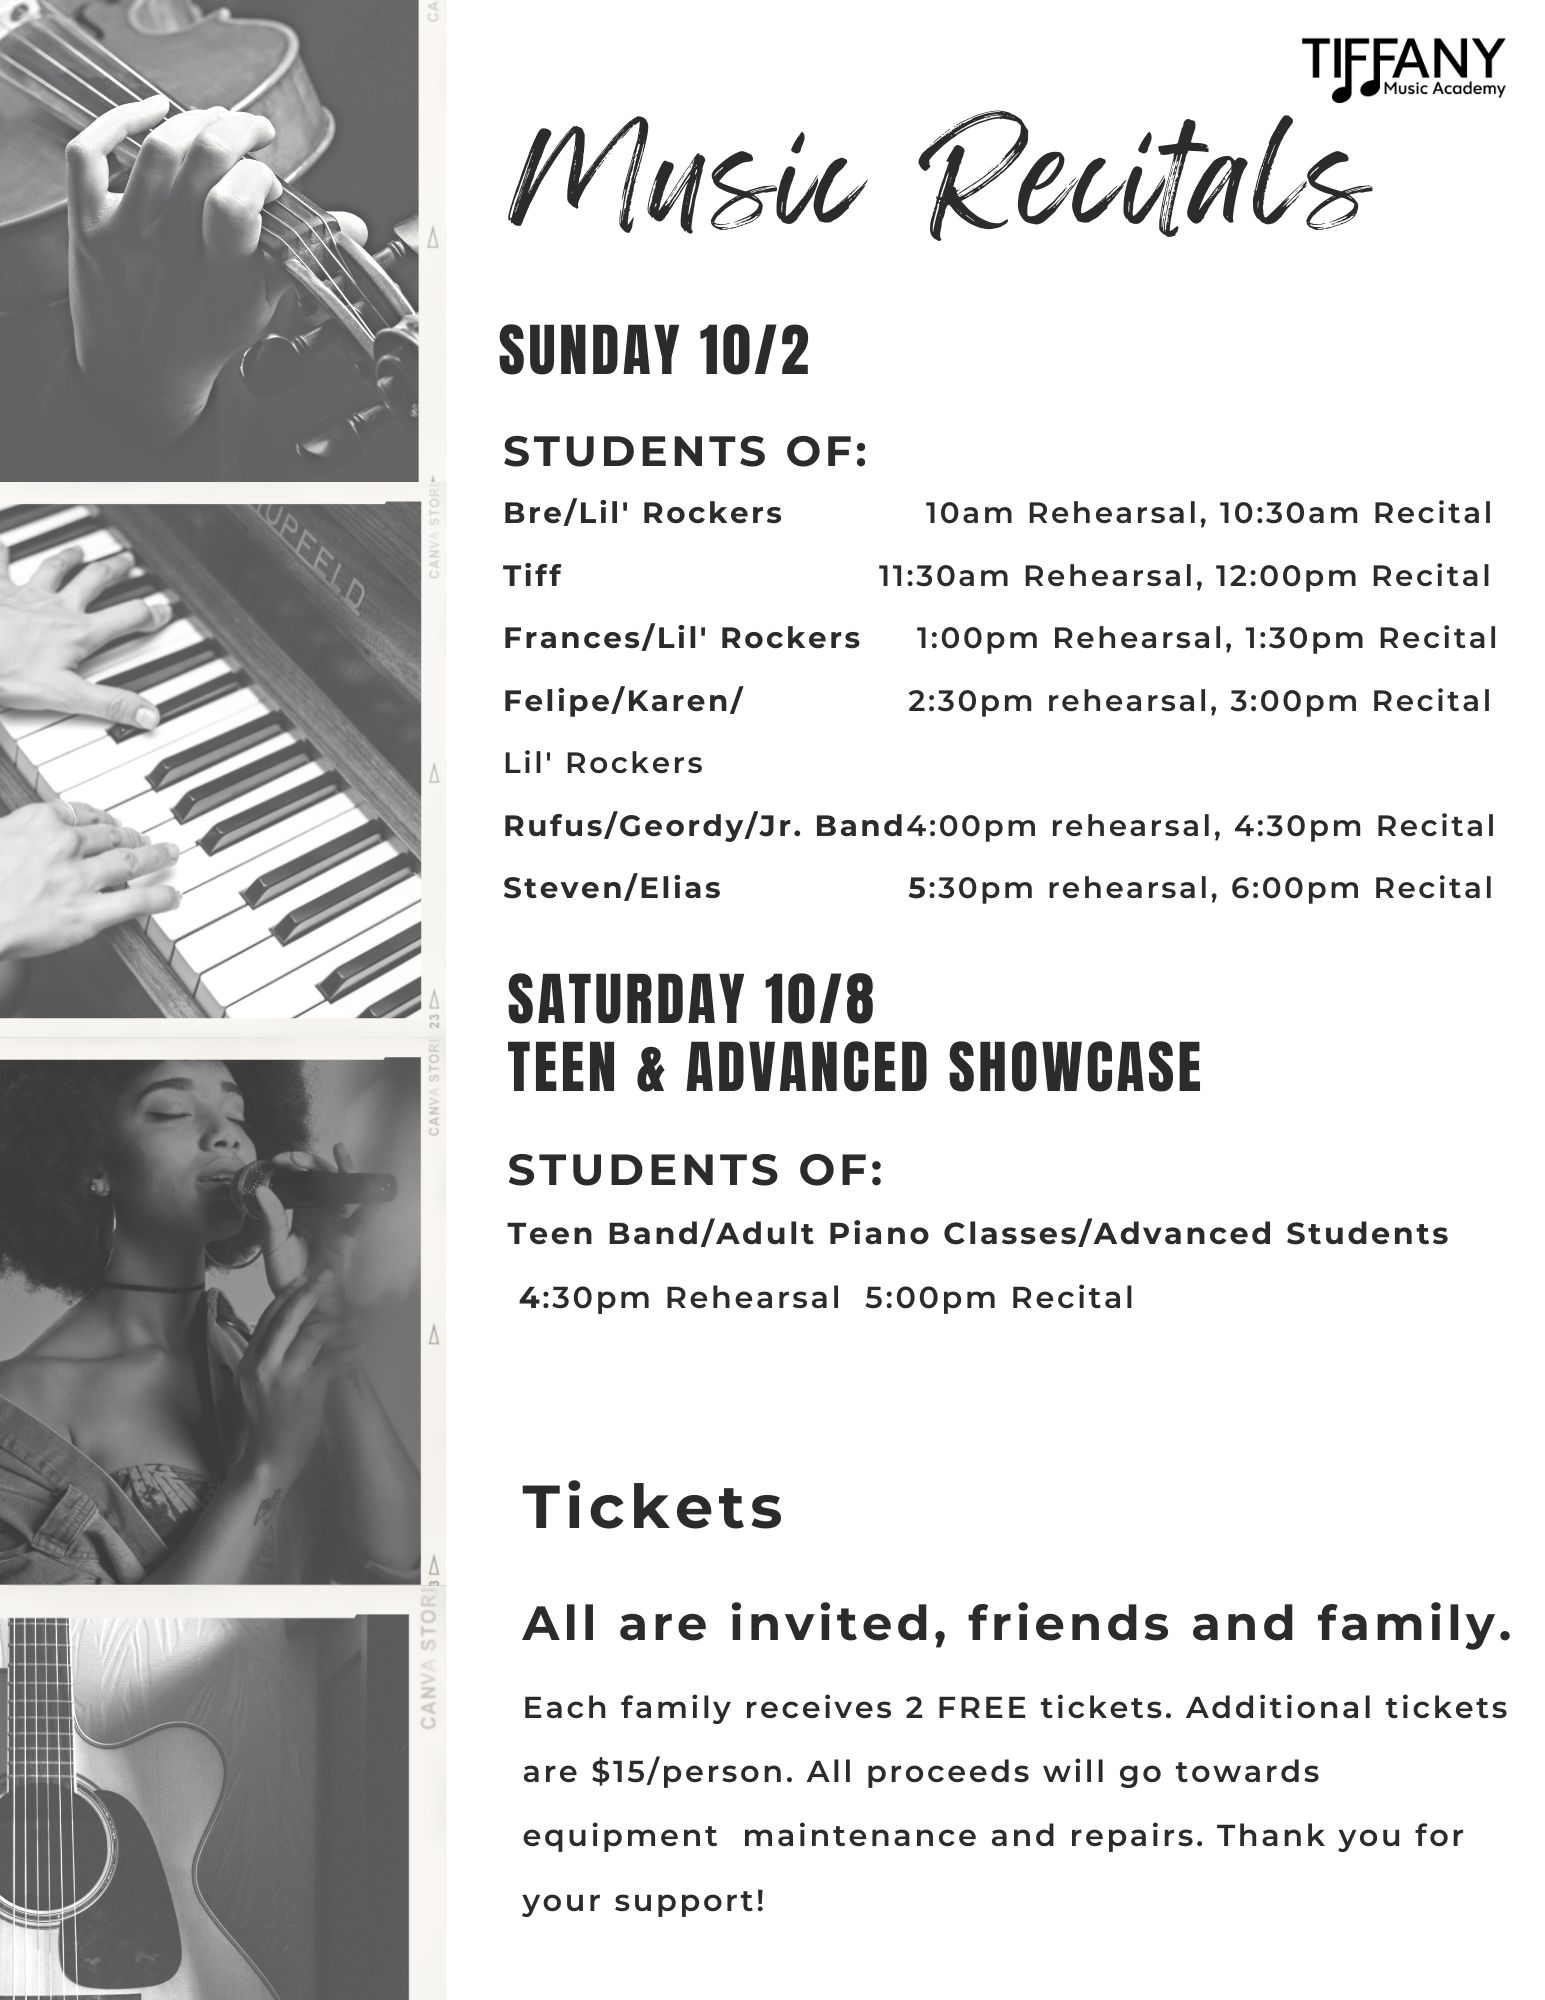 Black and Gray Music Festival Photographic Flyer